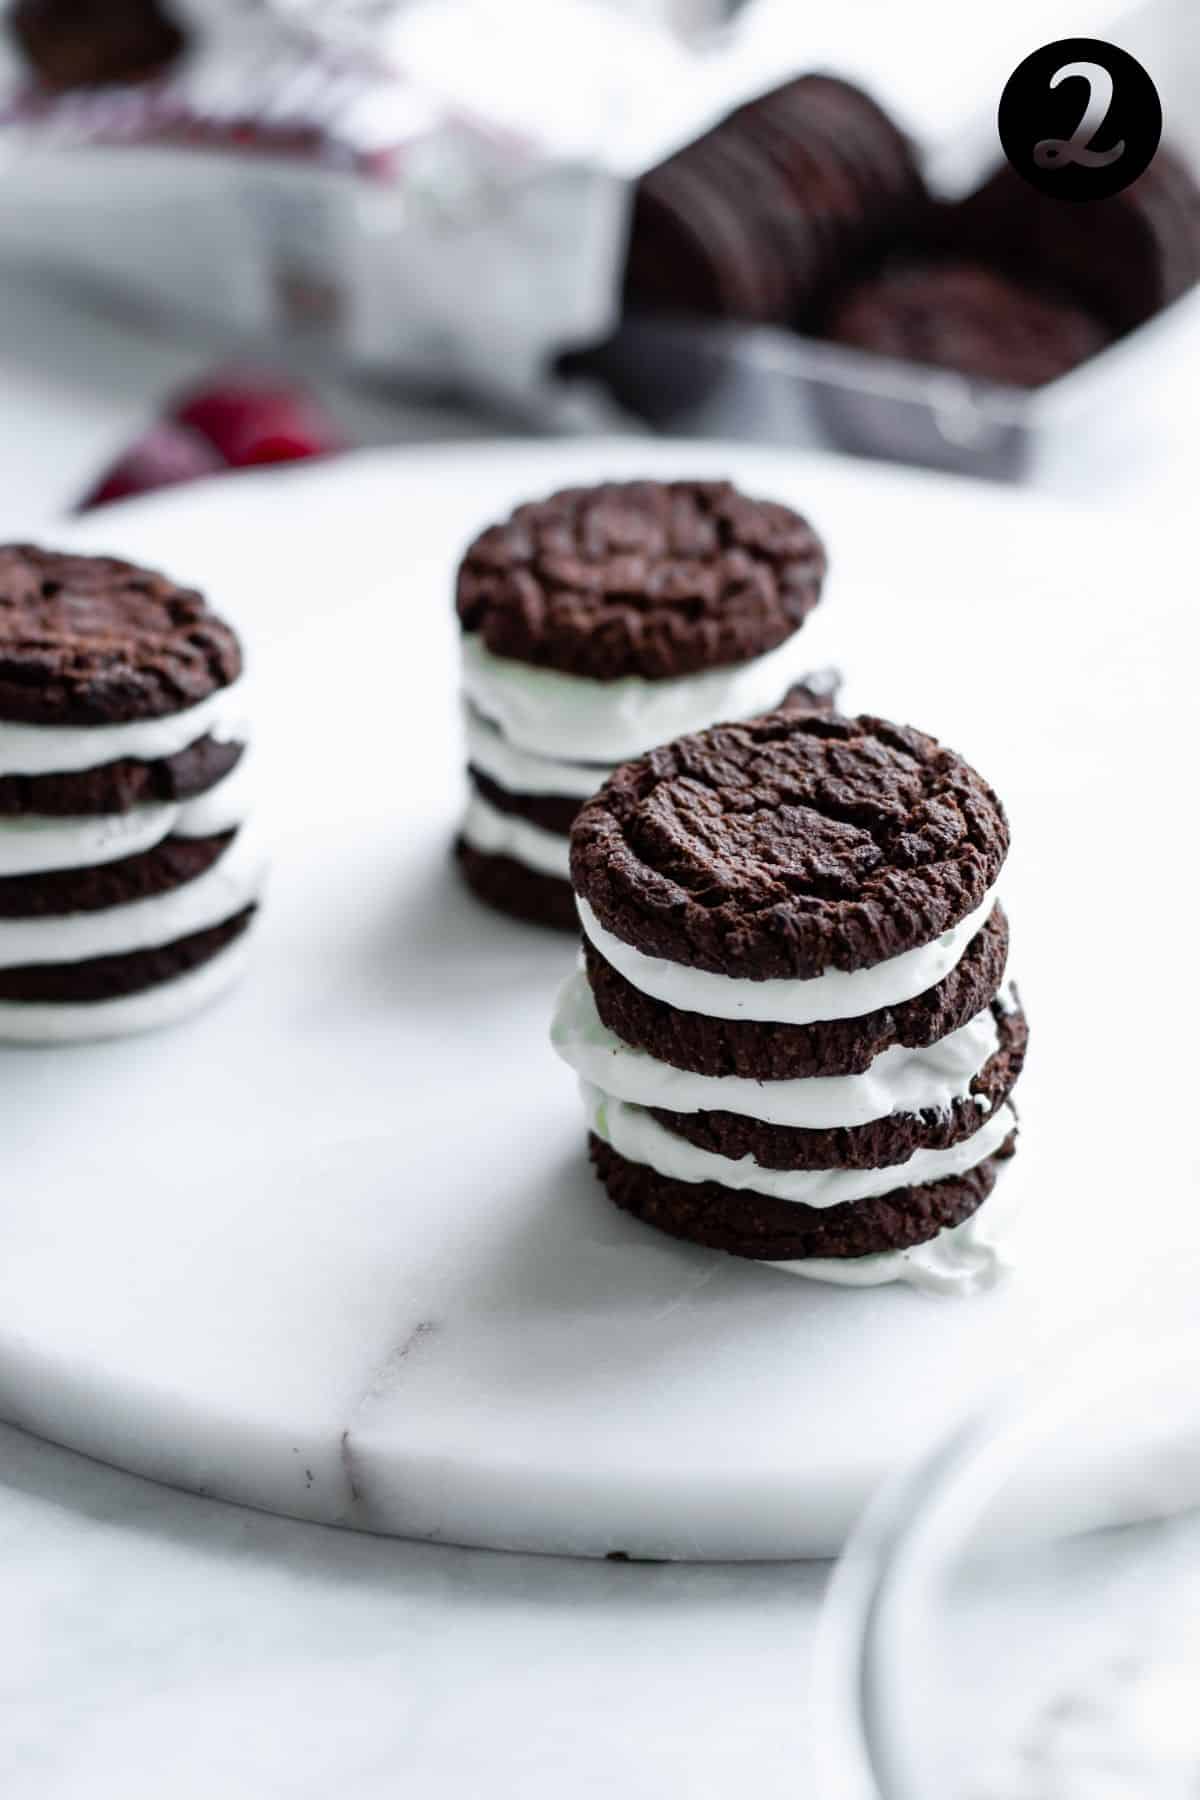 stacks of chocolate cookies and cream on white platter